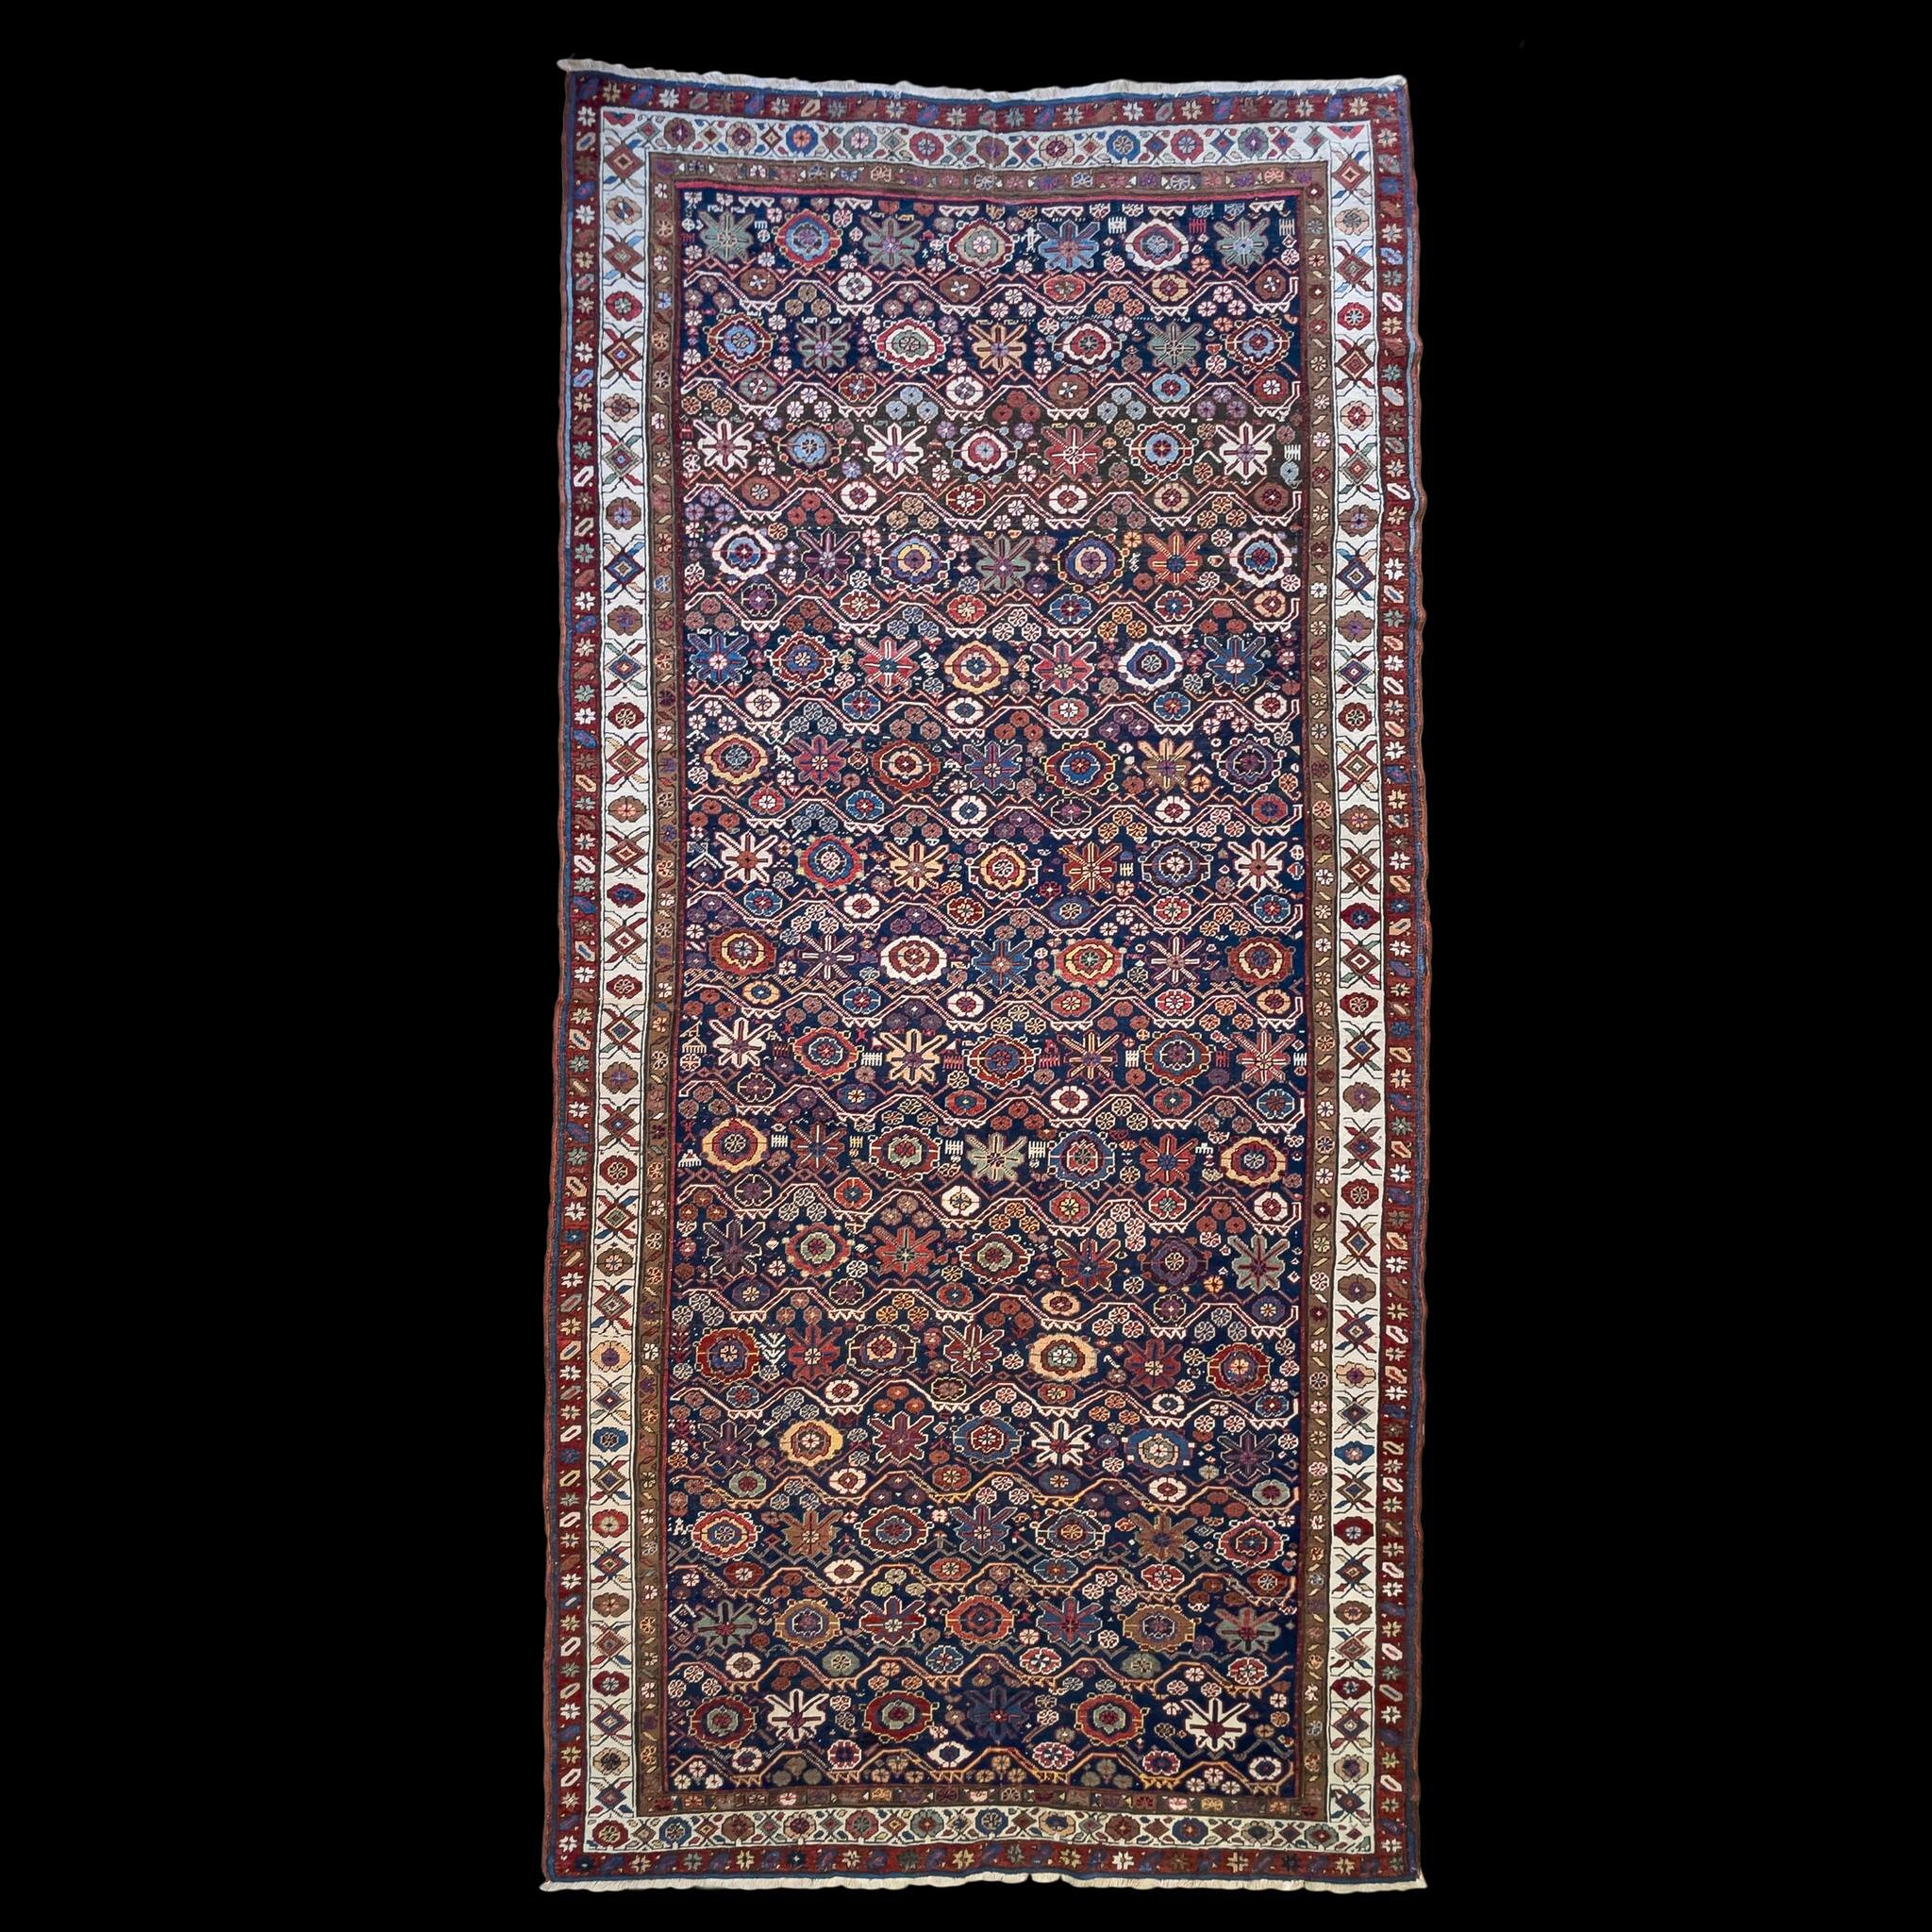 Discover our 1890s Ferahan Sarouk rug, a testament to Persian artistry from the Ferahan region. 

This masterpiece, celebrated for its exquisite wool, sophisticated palette, and harmonious blend of geometric and curvilinear designs, is a rare gem tha